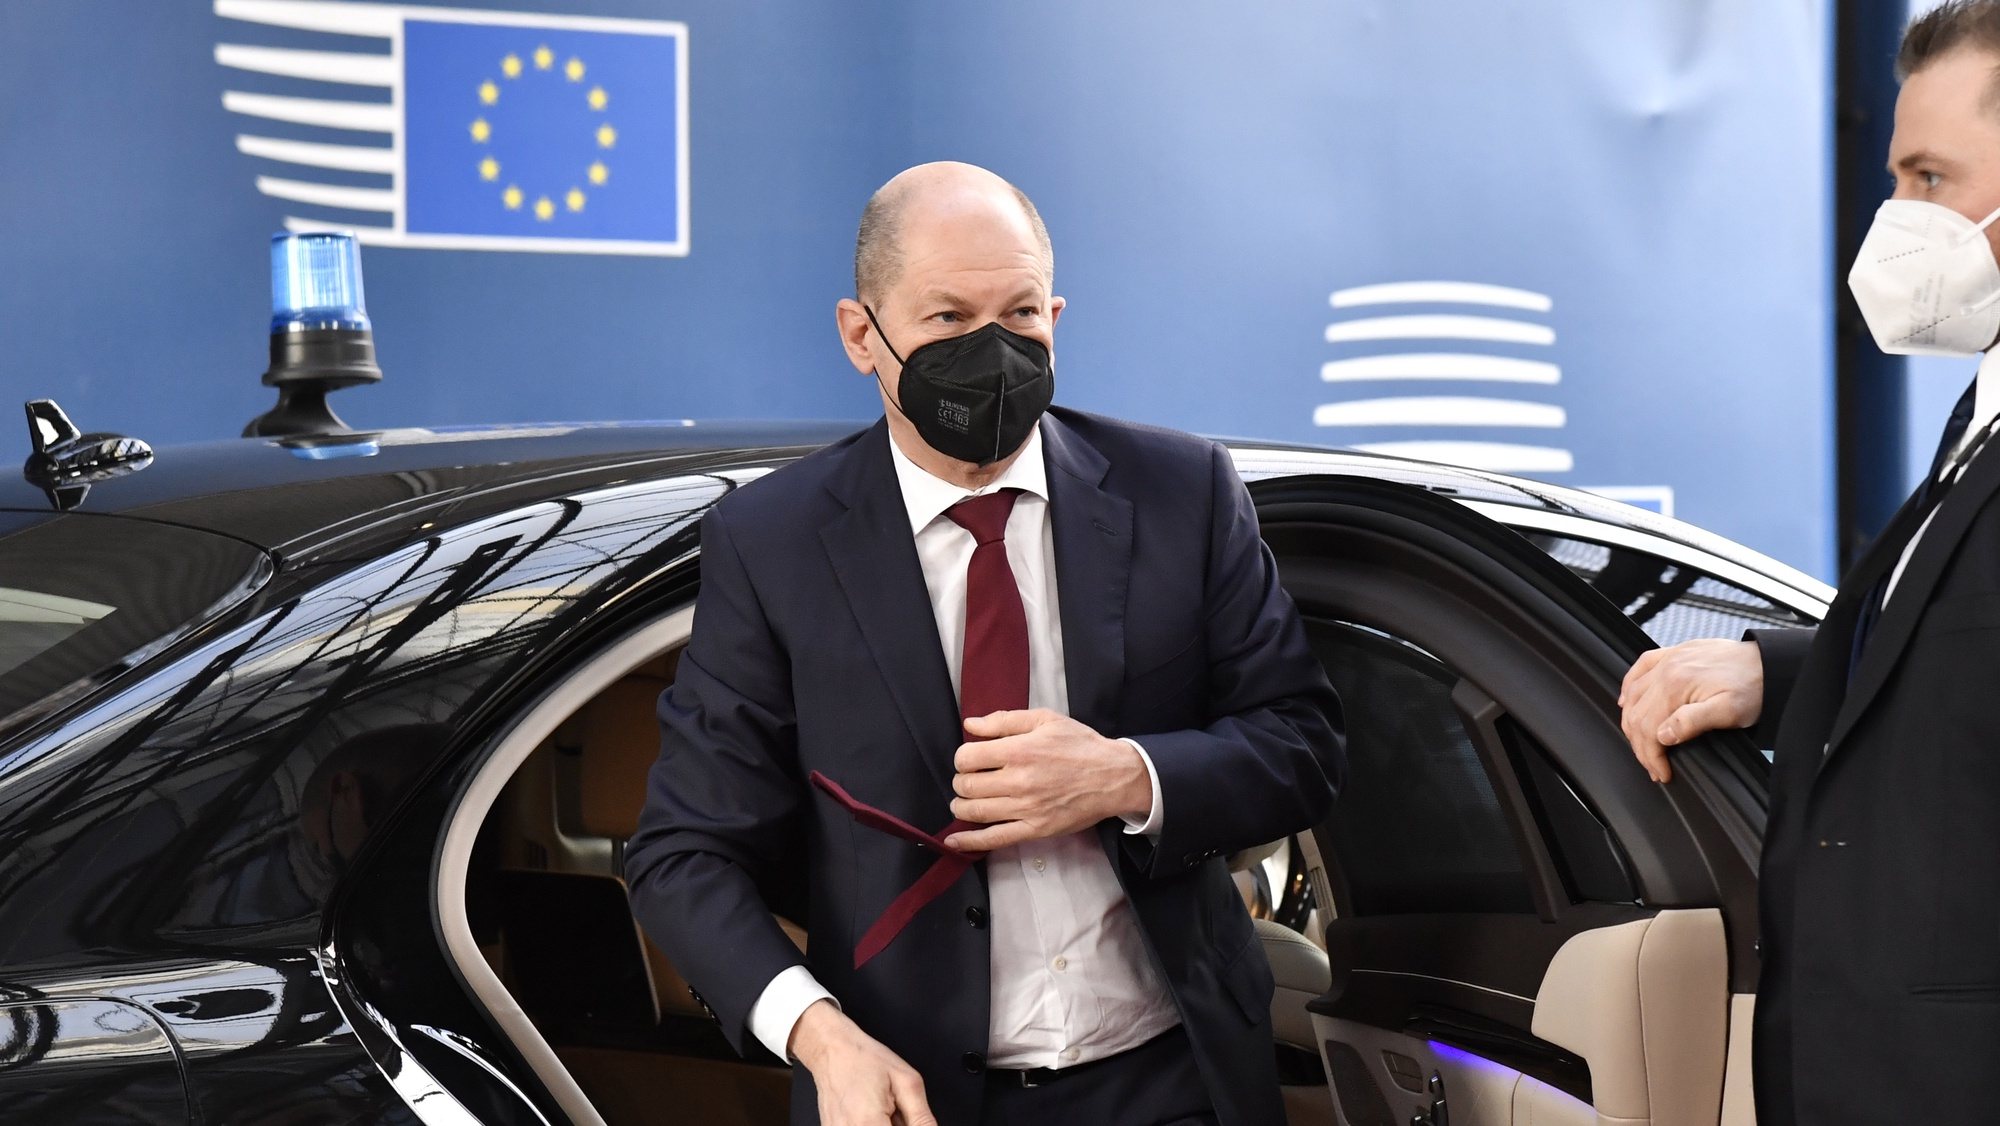 epa09765517 German Chancellor Olaf Scholz arrives for an extraordinary meeting of EU leaders to discuss the situation in Ukraine, at the European Council building in Brussels, Belgium, 17 February 2022.  EPA/Geert Vanden Wijngaert / POOL